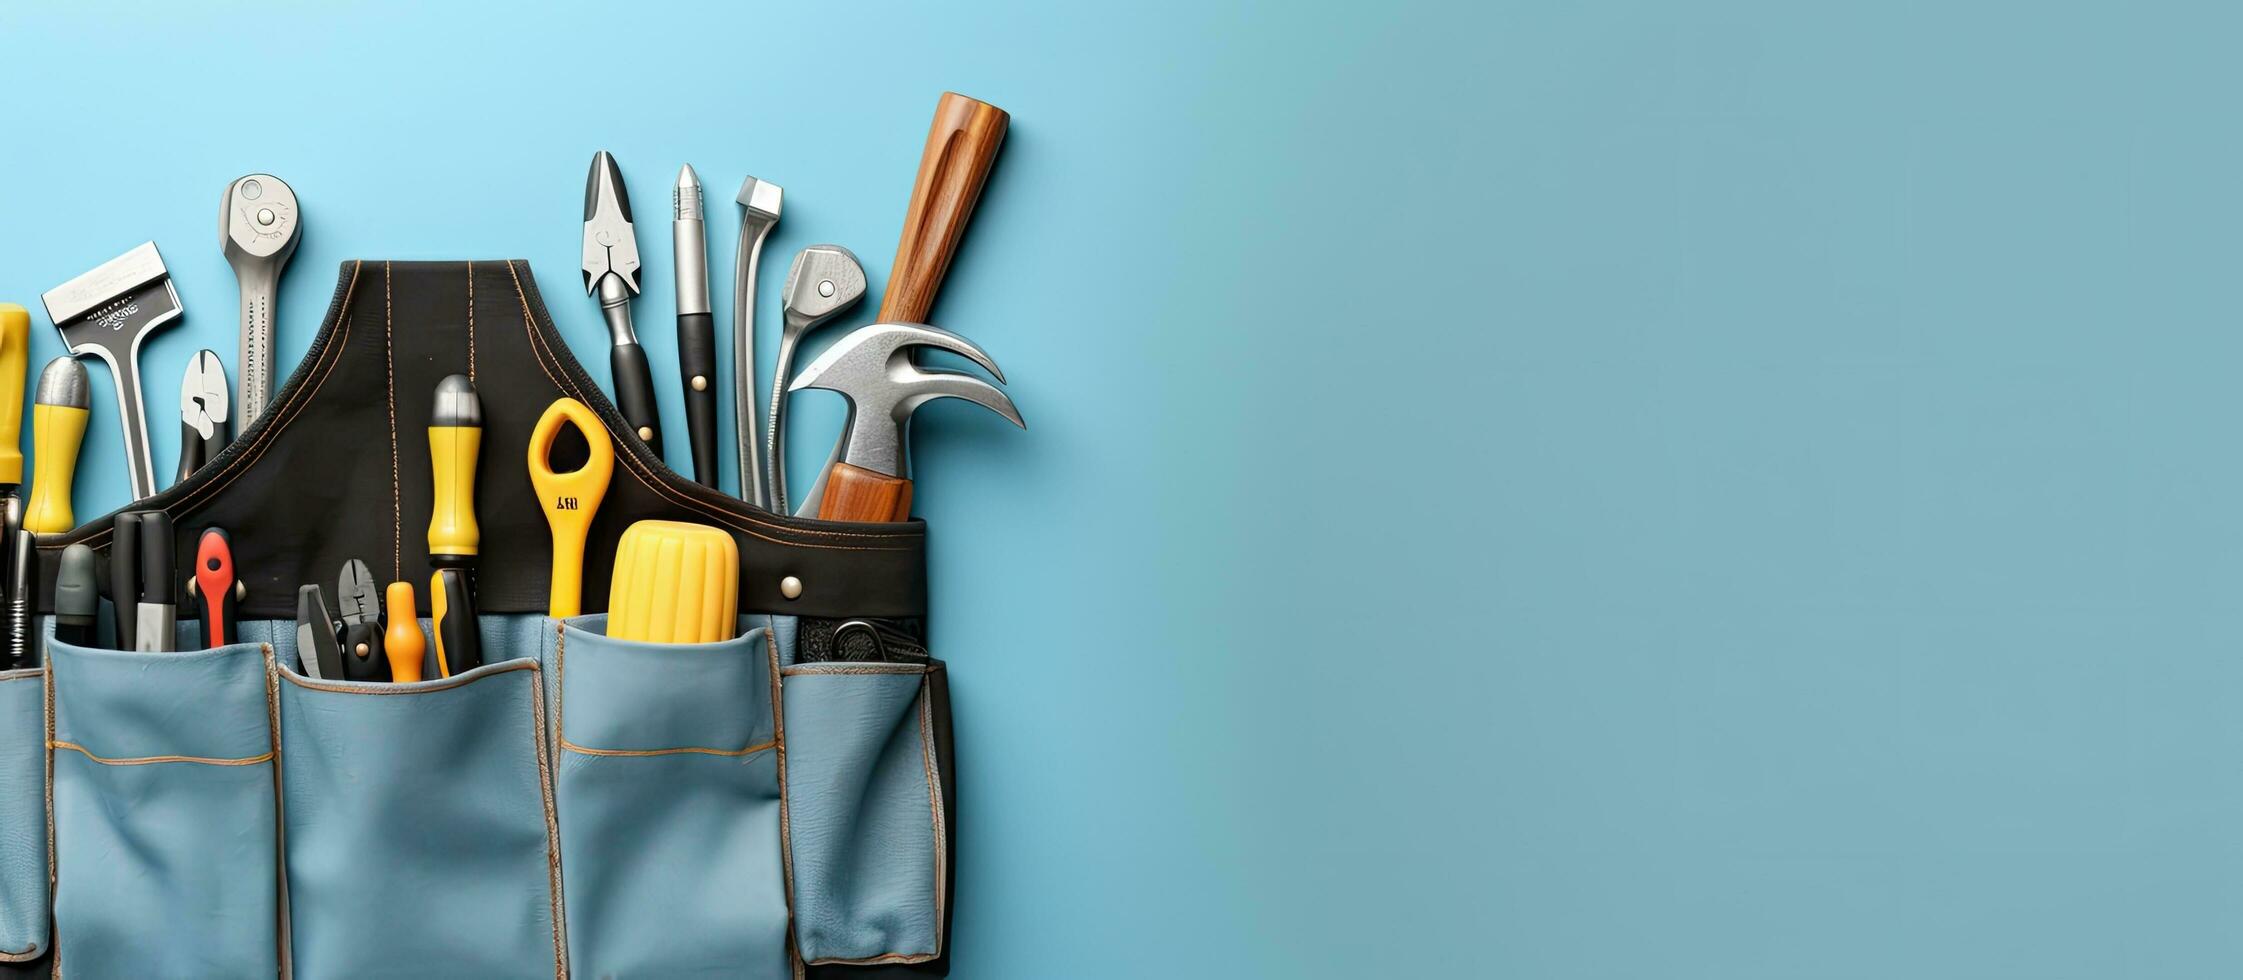 Photo of a tool belt filled with various tools on a vibrant blue background with copy space